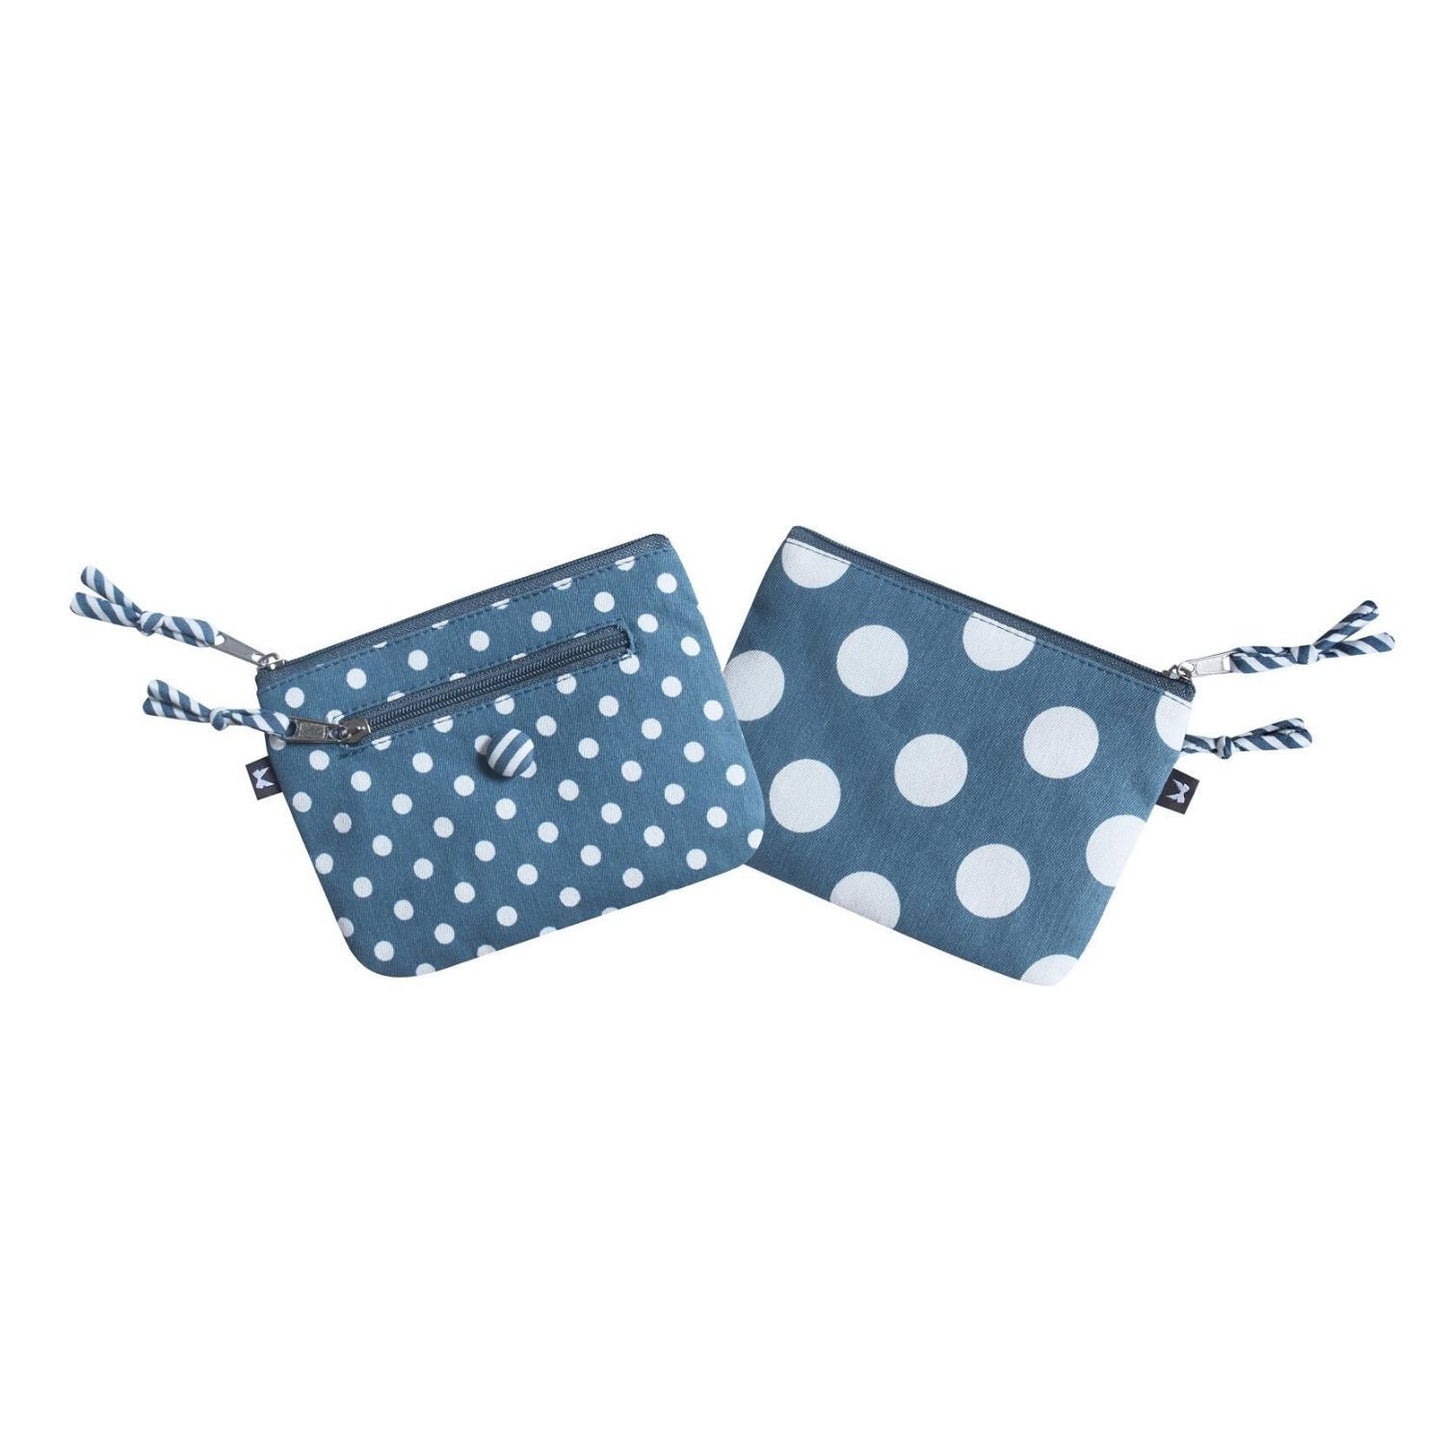 Emily Purse Spotty and Blue